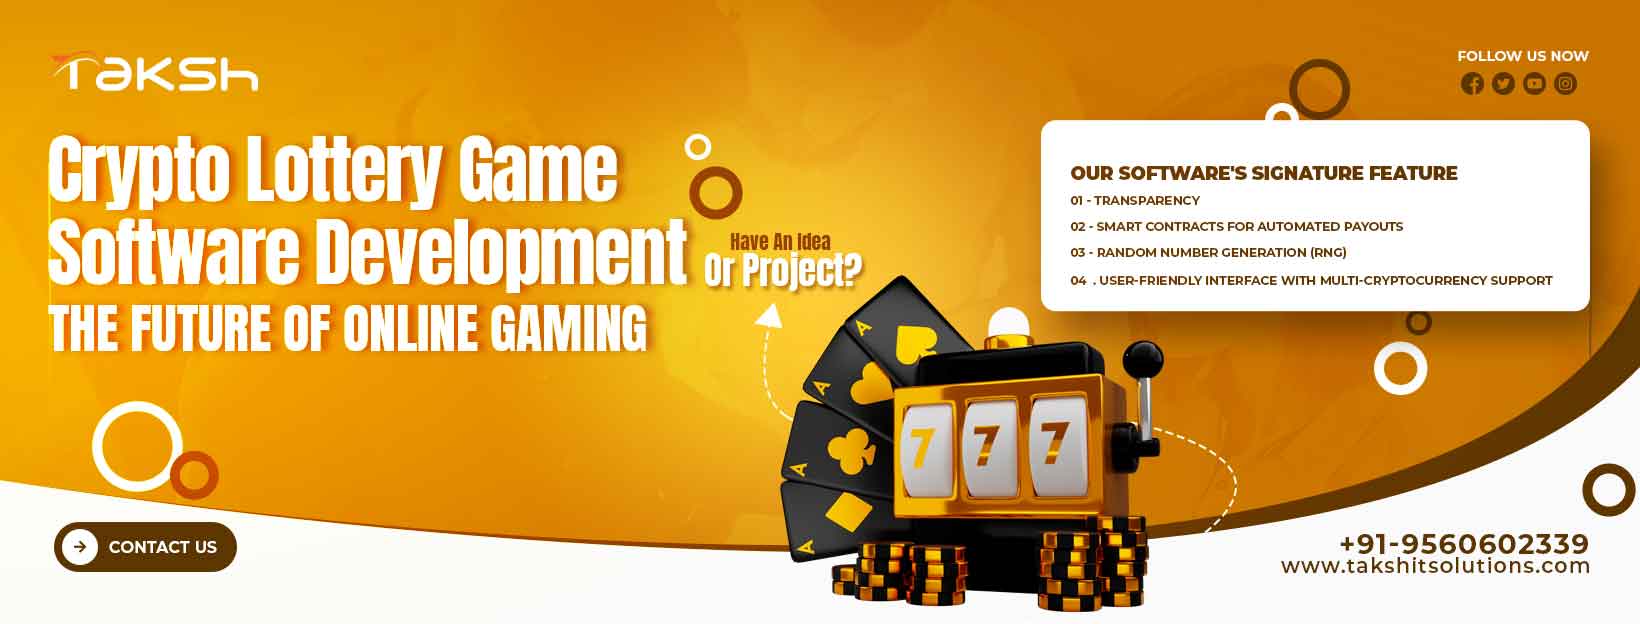 Crypto Lottery Game Software Development: The Future of Online Gaming